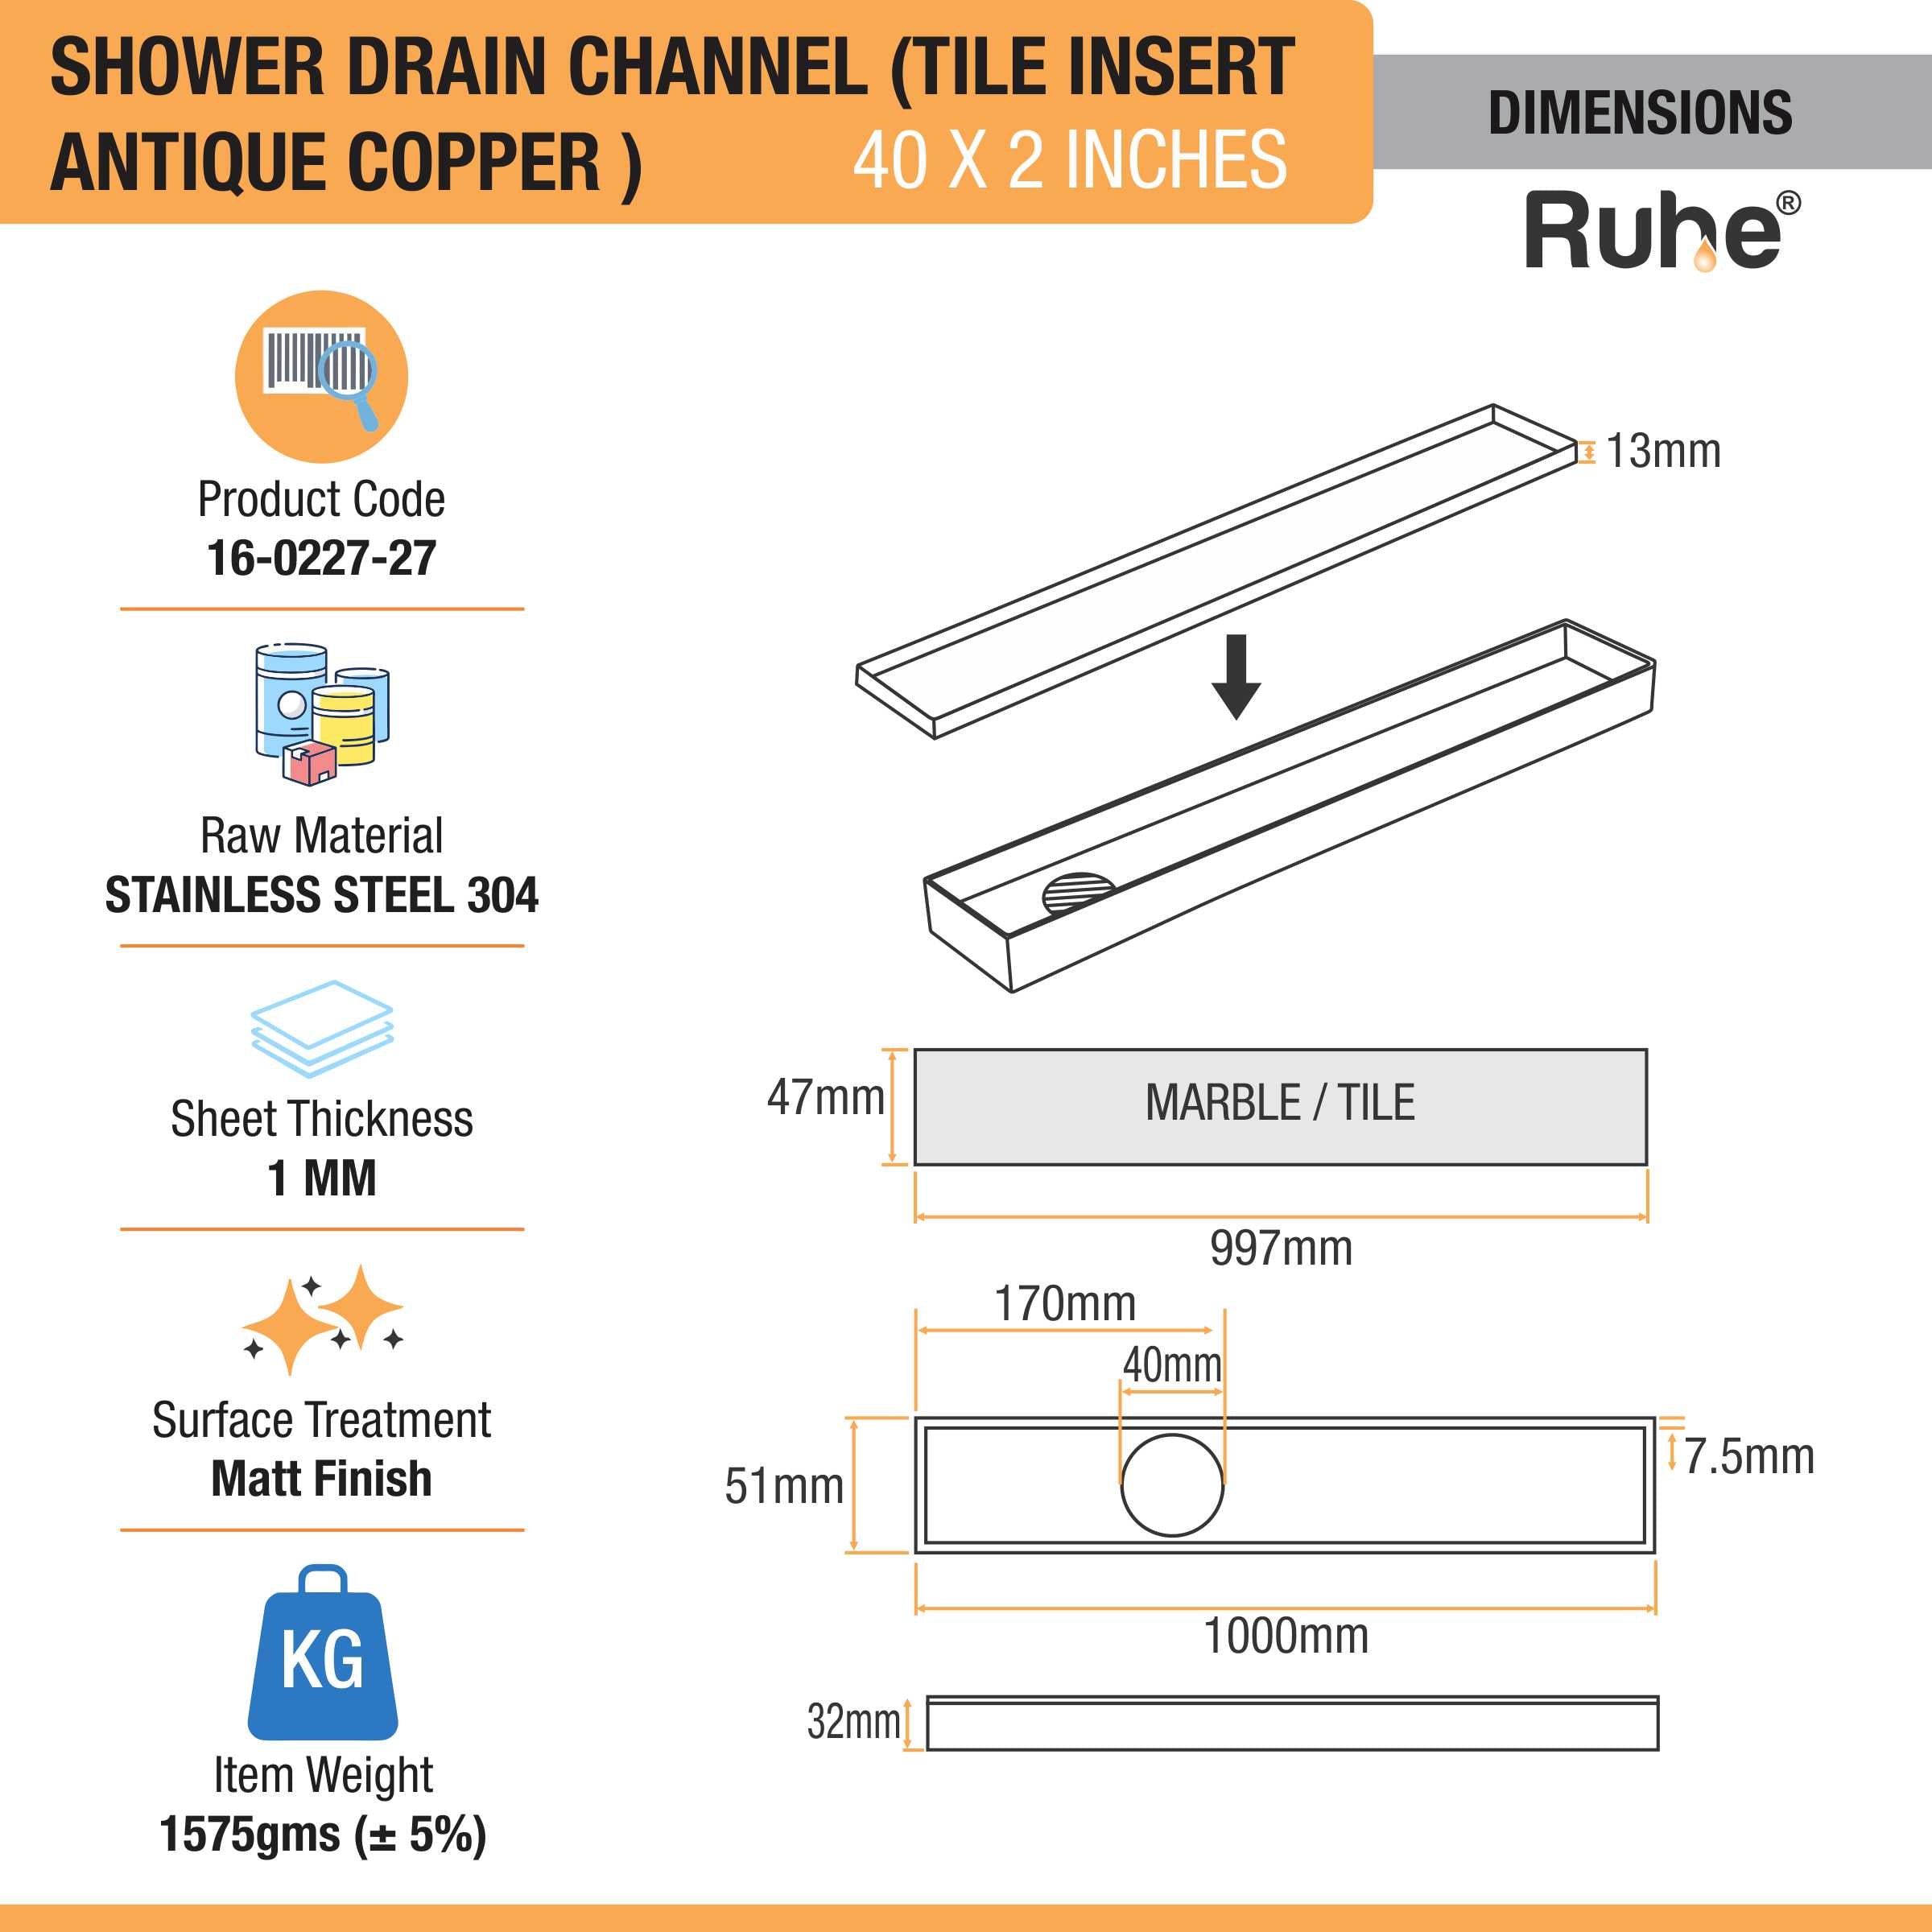 Tile Insert Shower Drain Channel (40 x 2 Inches)ROSE GOLD/ANTIQUE COPPER dimensions and size